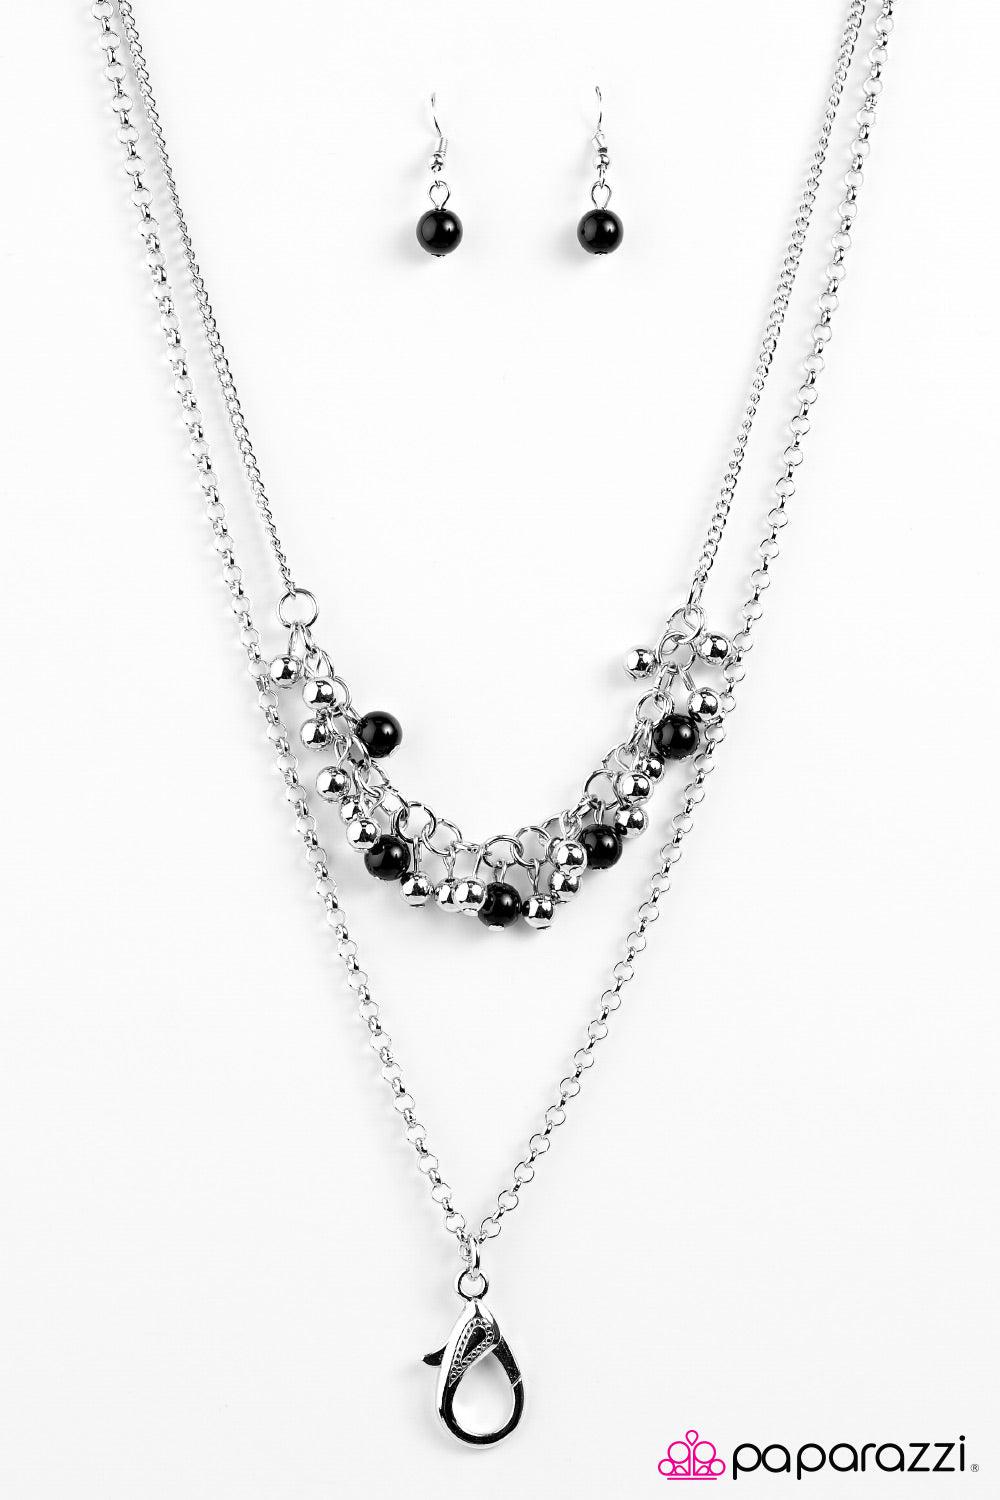 Runway Sparkle Black Necklace - Paparazzi Accessories- lightbox - CarasShop.com - $5 Jewelry by Cara Jewels